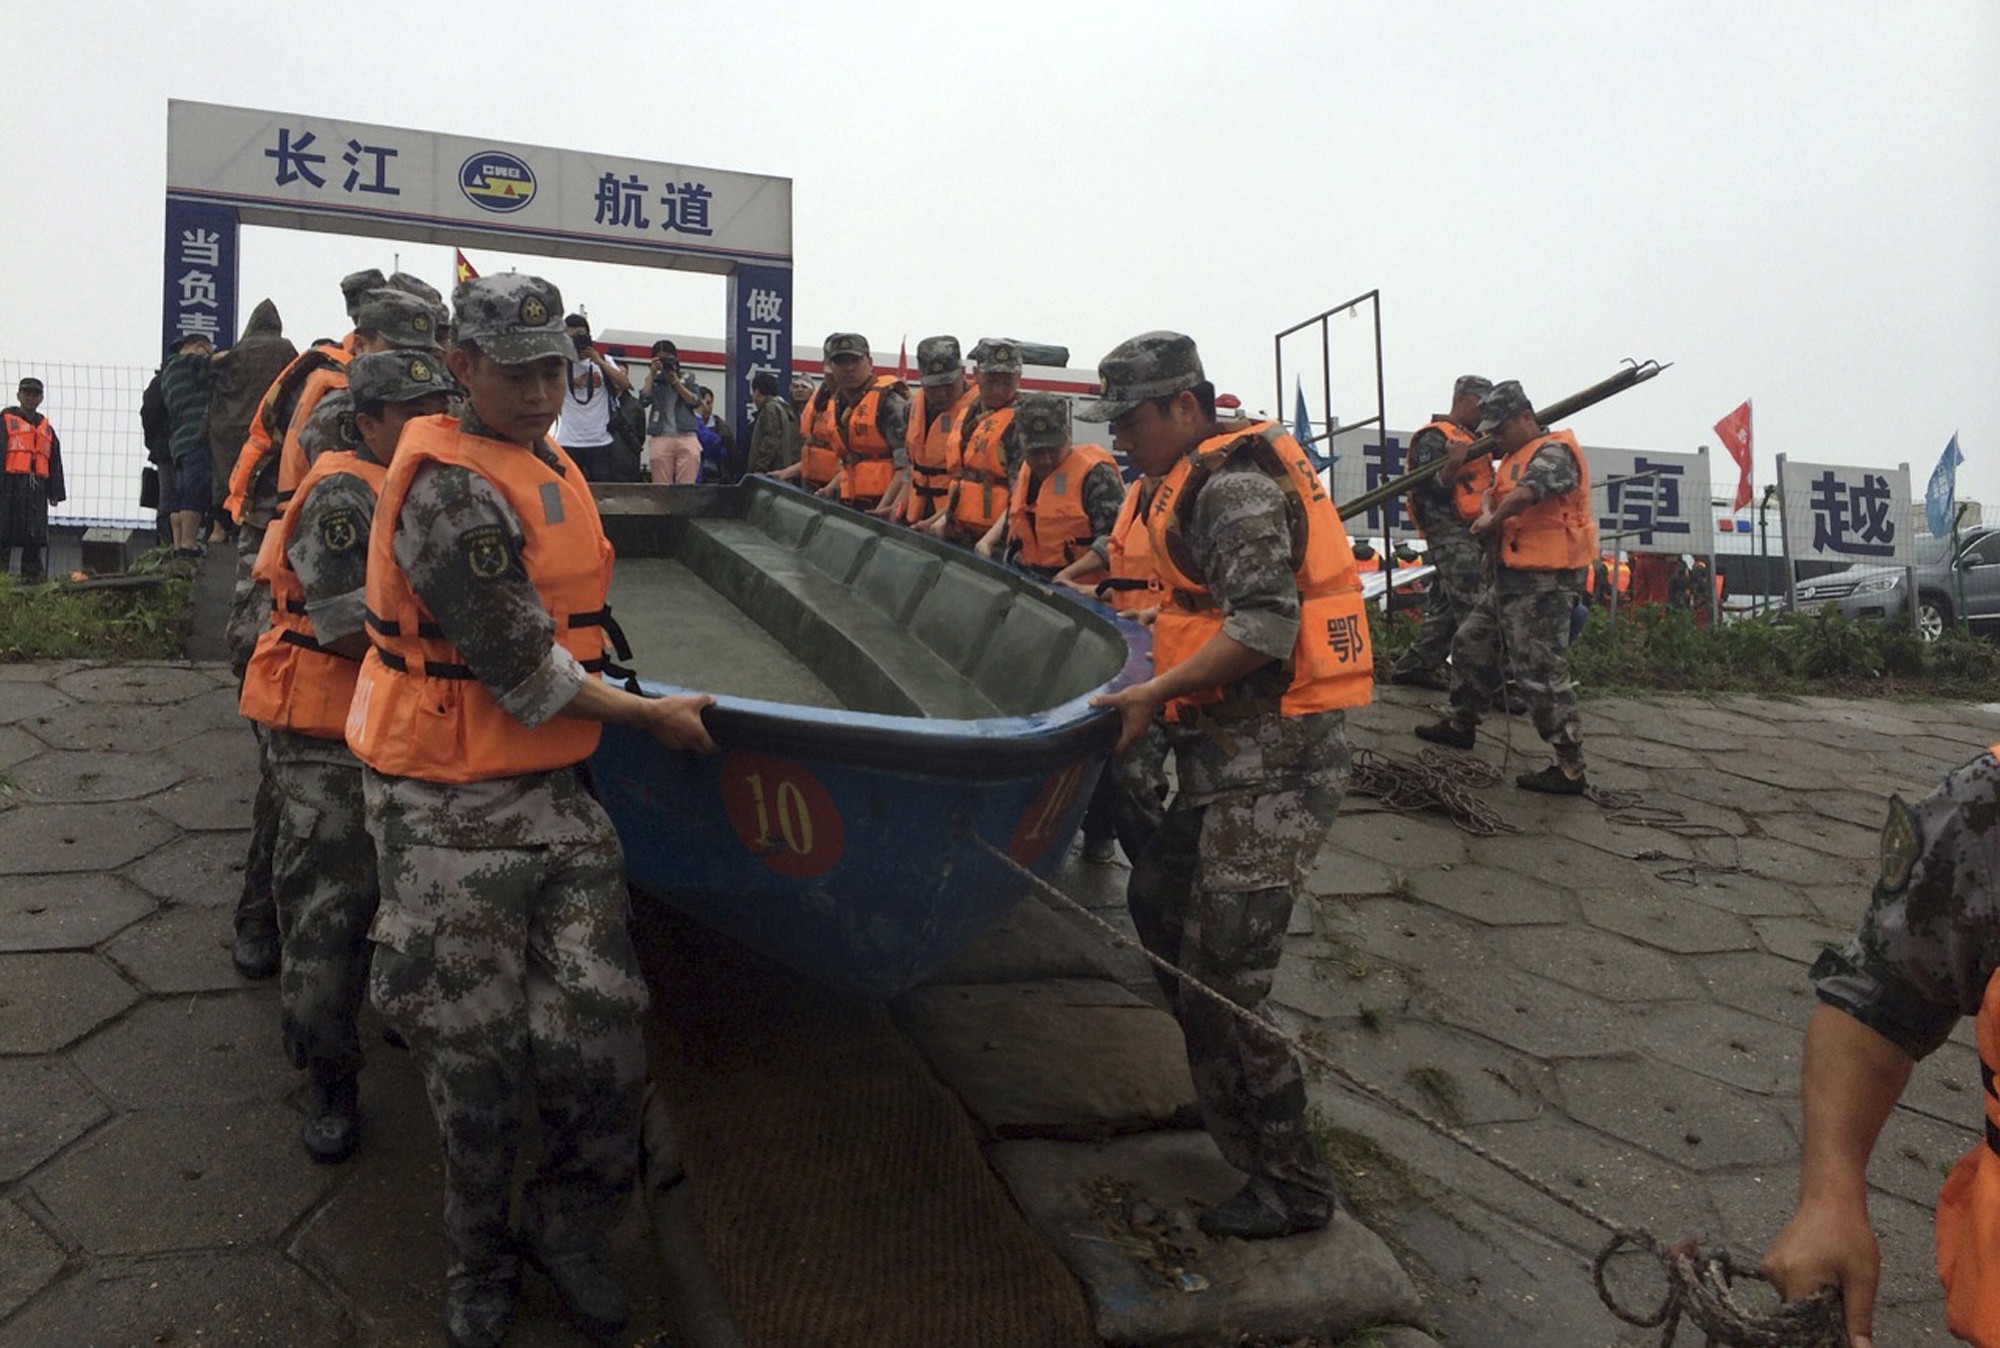 Rescue workers prepare to head out on boats on the Yangtze River to search for missing passengers after a ship capsized in central China's Hubei province Tuesday.  The passenger ship carrying more than 450 people sank overnight in the Yangtze River during a storm in southern China, the official Xinhua News Agency reported Tuesday.